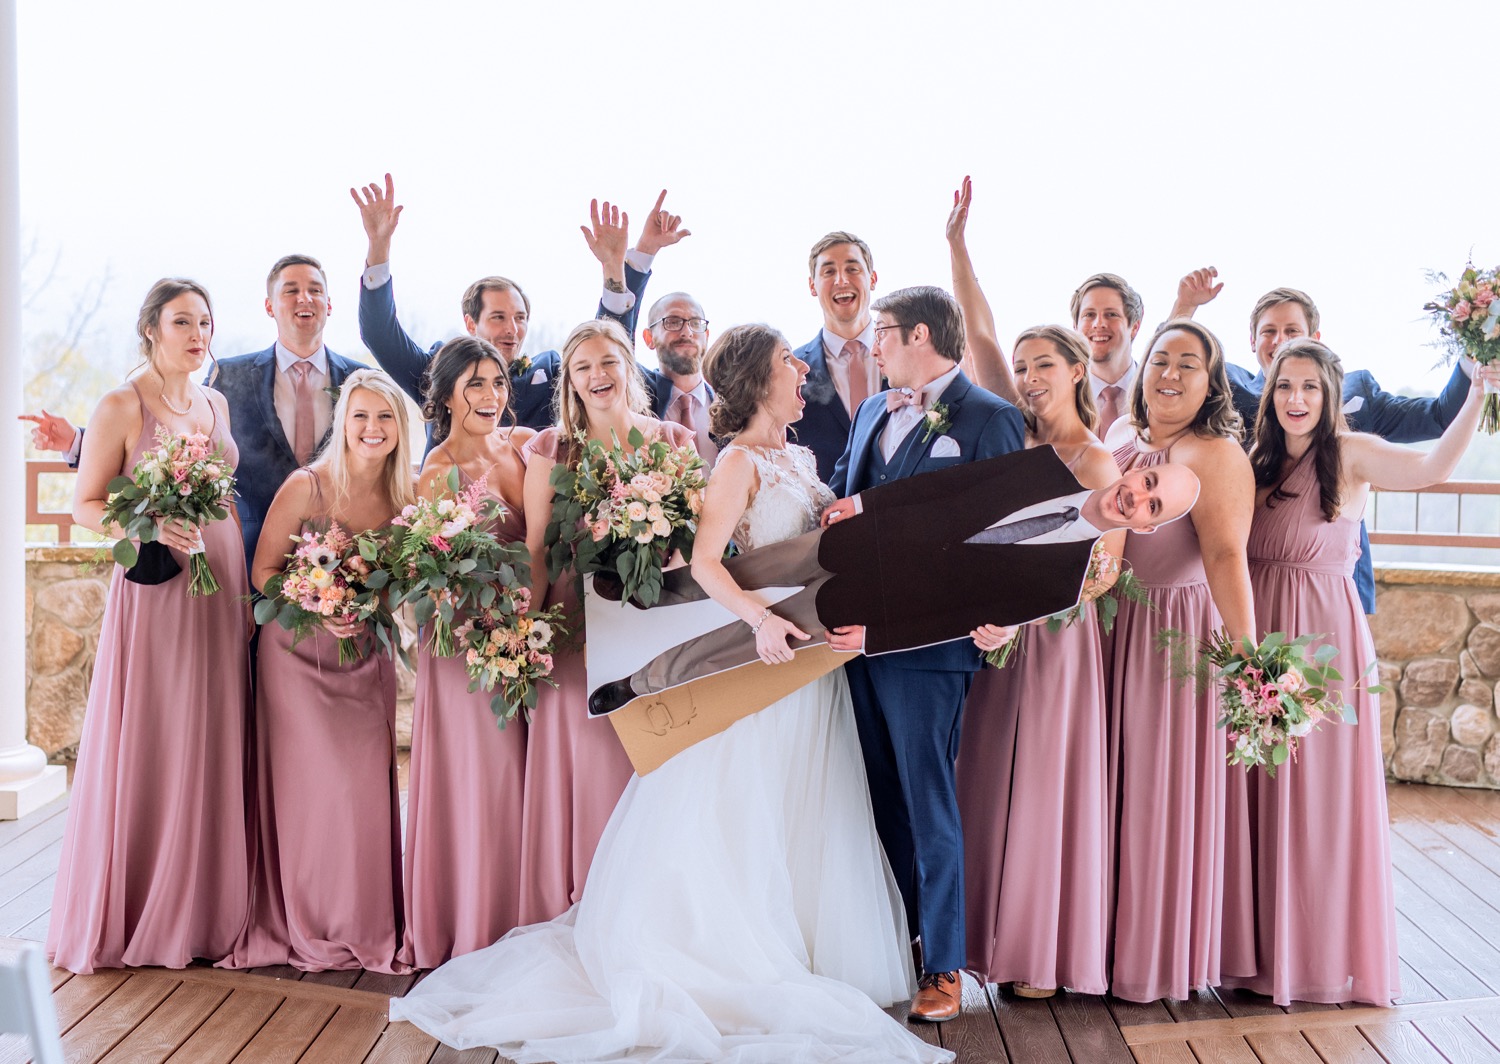 Bride and groom pose with bridal party and cardboard best man at Irvine Estate